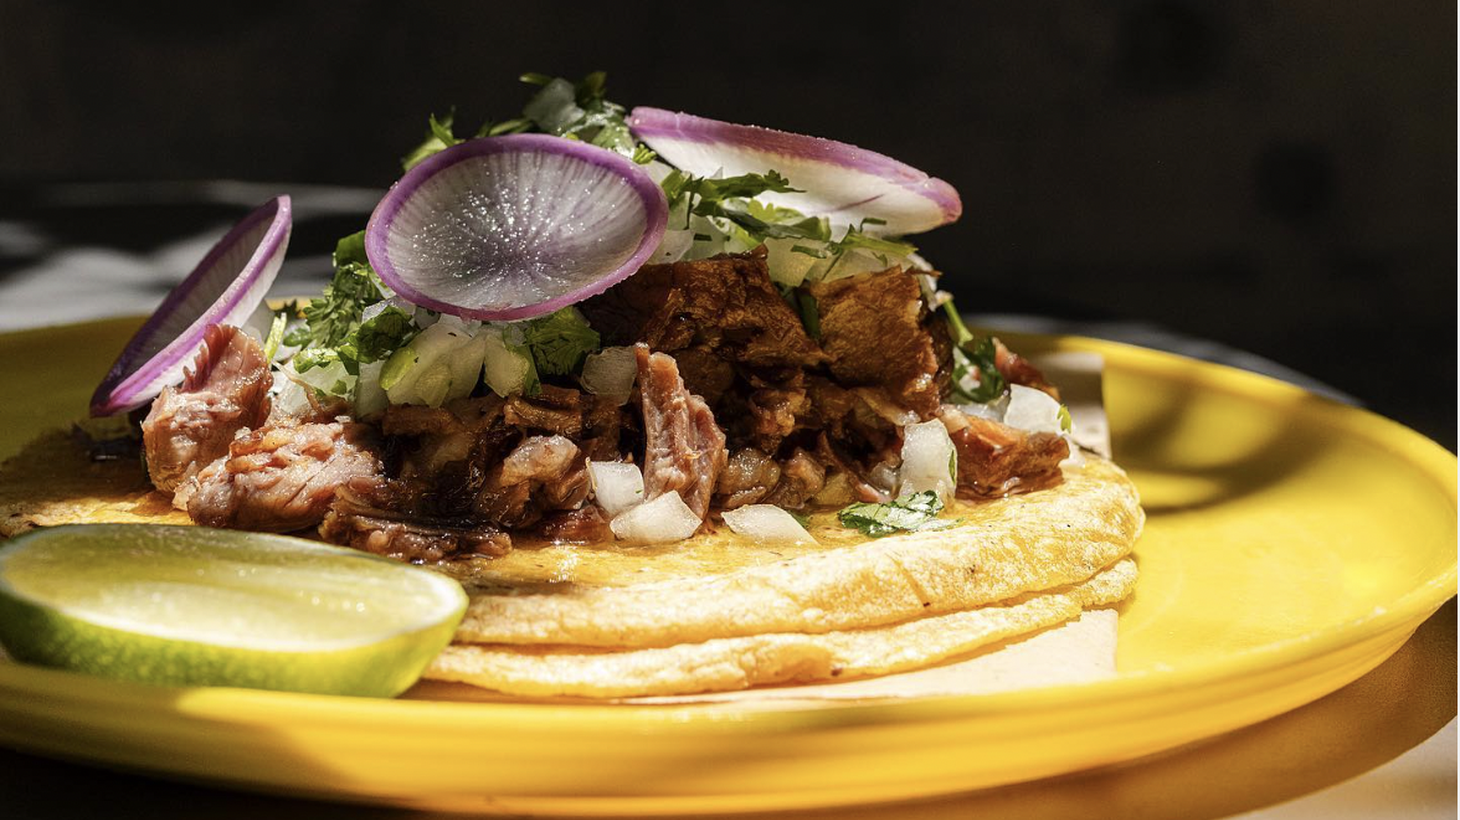 The suadero taco is Jorge Gaviria’s favorite at Ditroit in downtown LA’s Arts District.